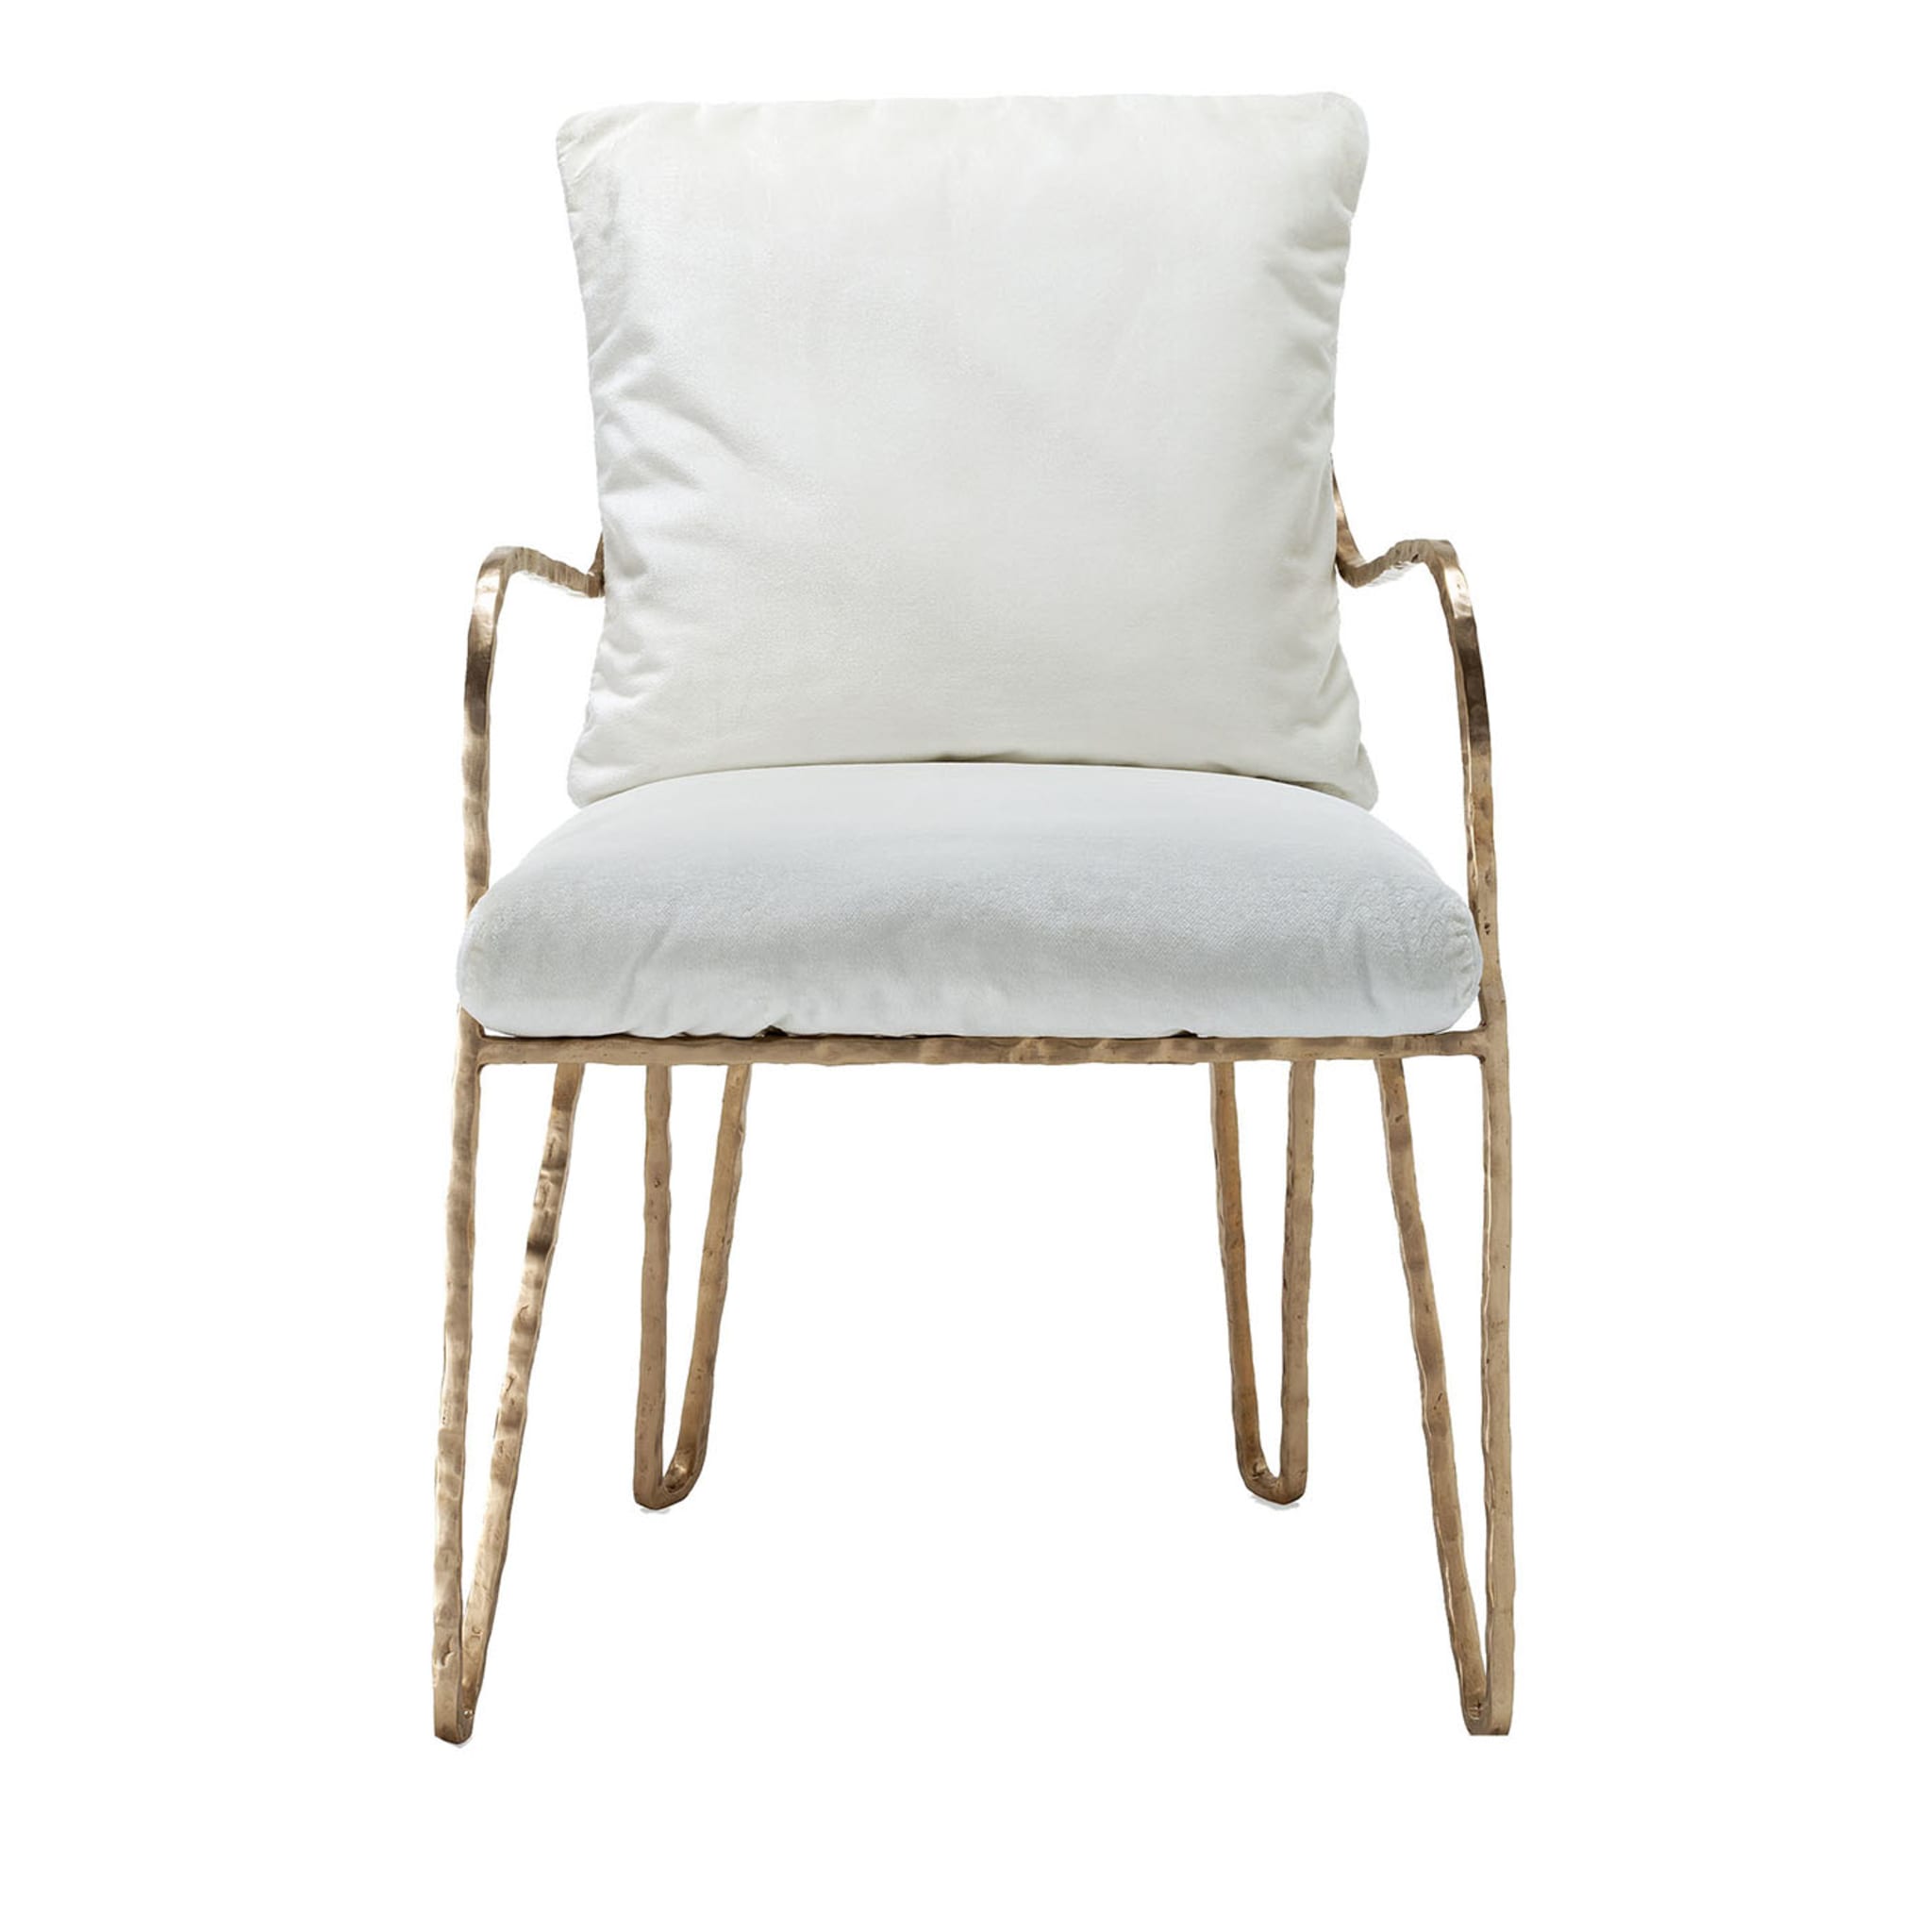 Moonlight White and Gold Low Chair - Main view